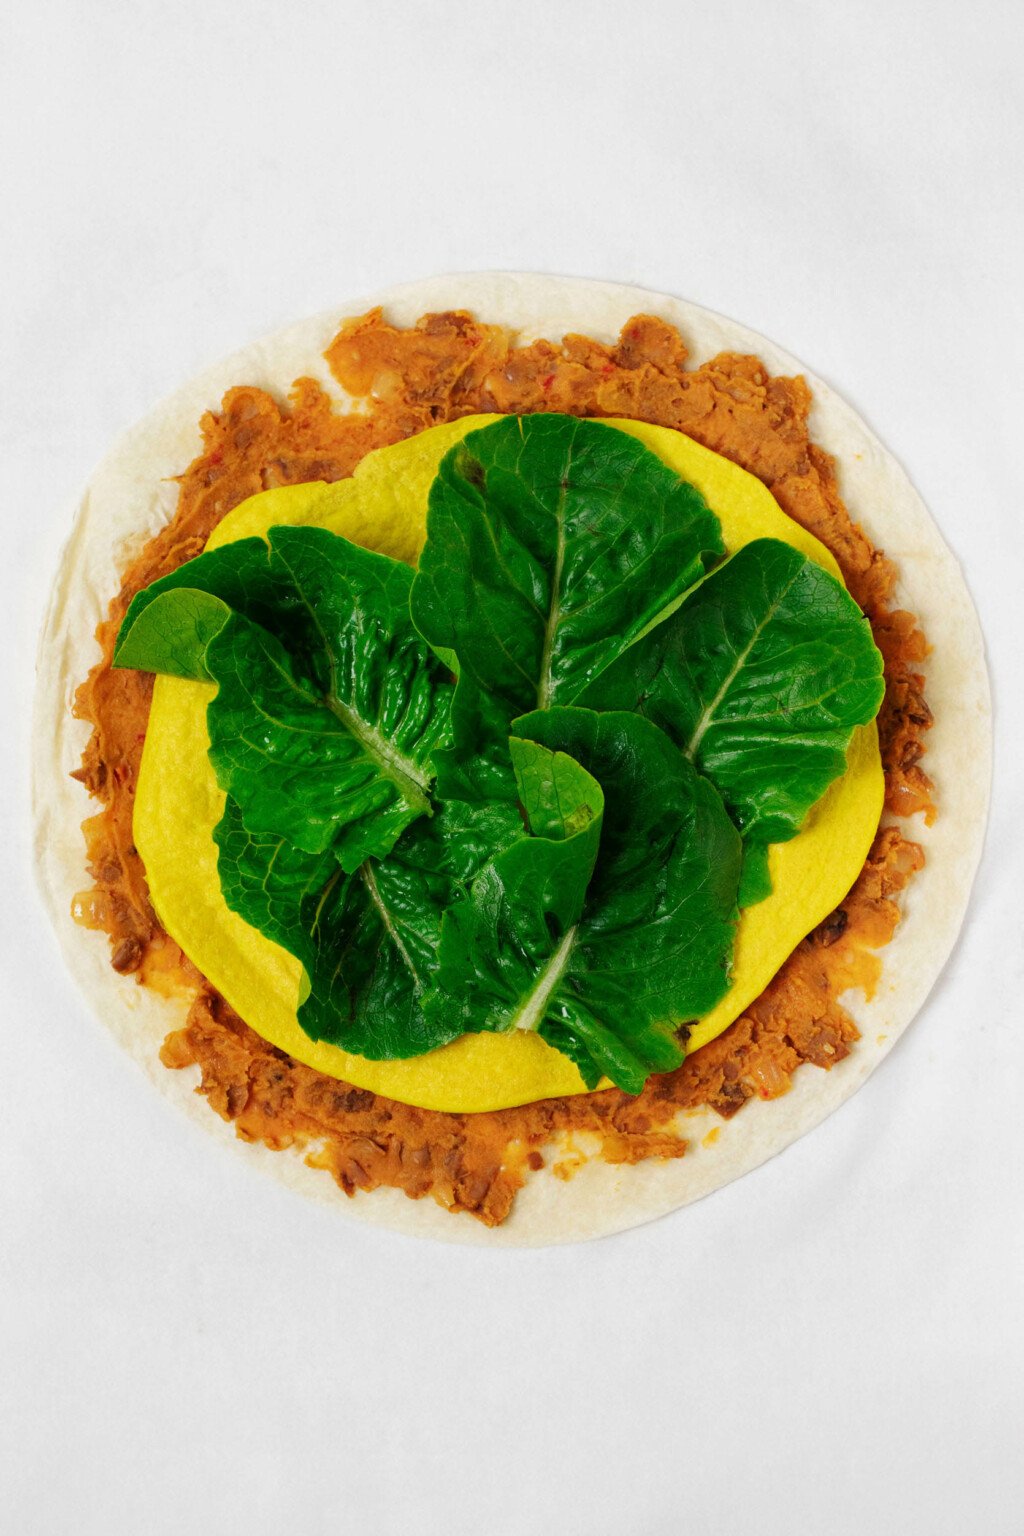 A round, flour tortilla has been layered with refried beans, a vegan egg mixture, and romaine lettuce leaves.